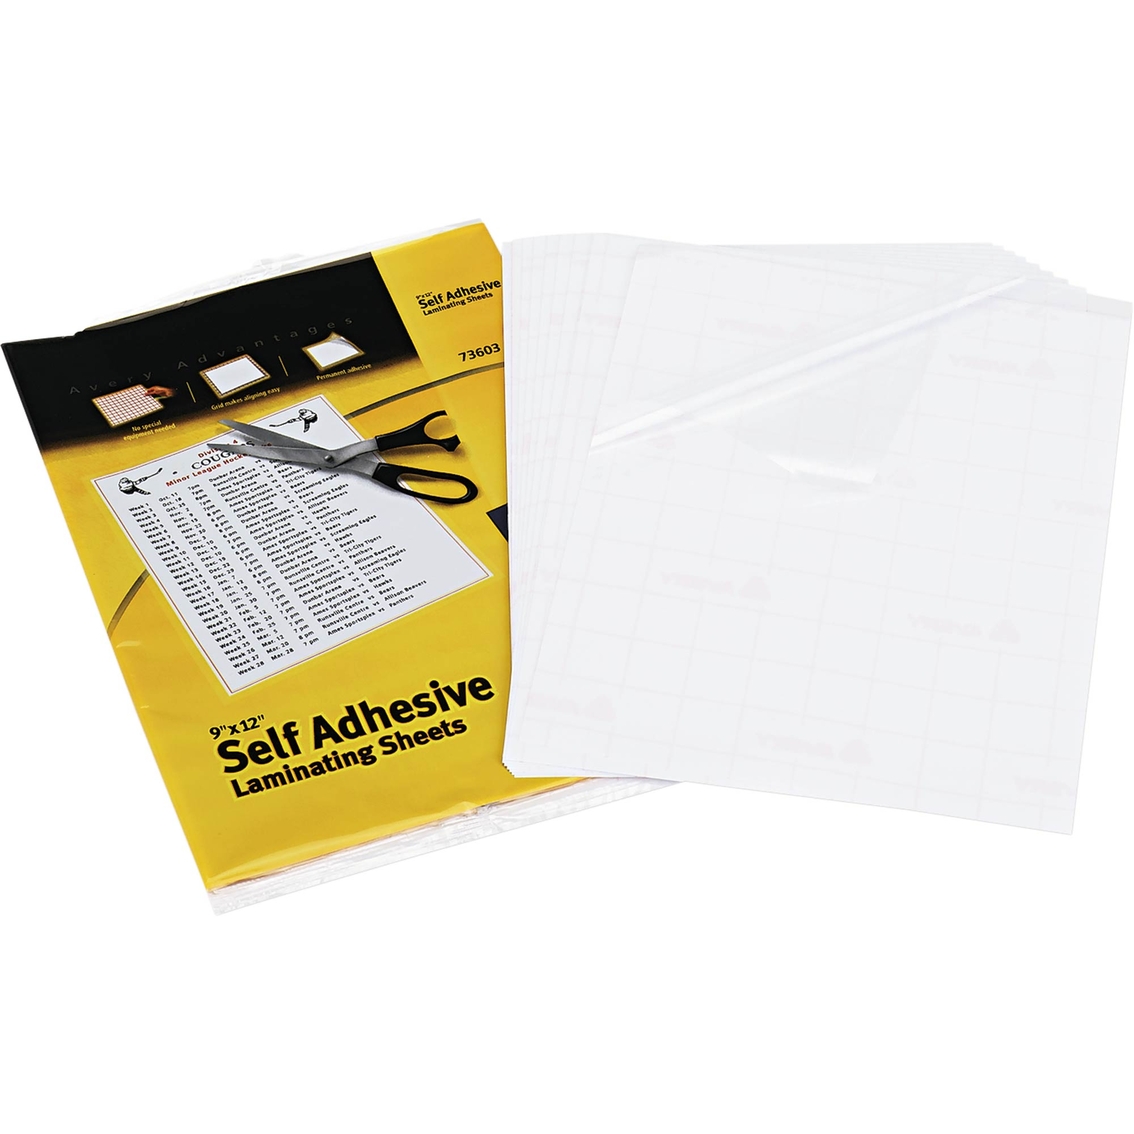 Avery Clear Self-Adhesive Laminating Sheets, 9 x 12 In., 10 Pk. - Image 3 of 3